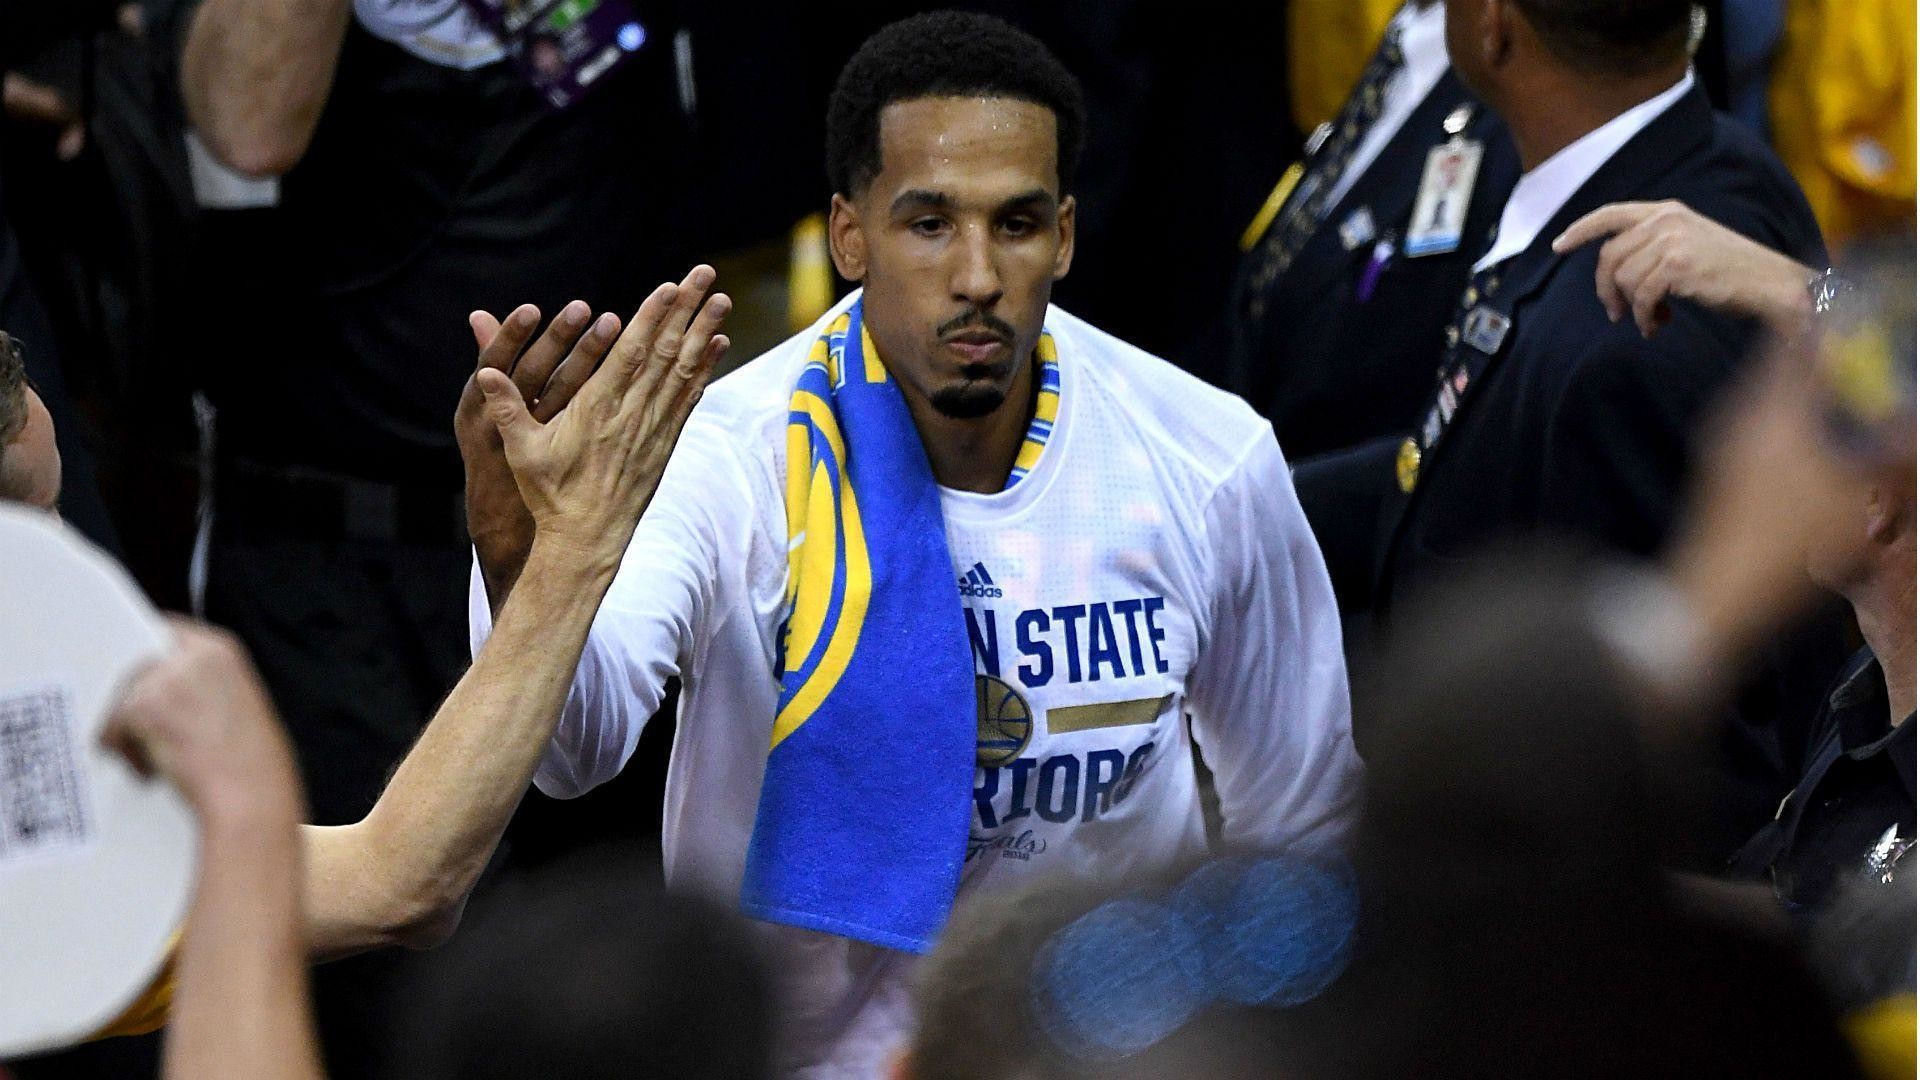 1920x1080 With another ring in sight, Shaun Livingston refuses to look back .